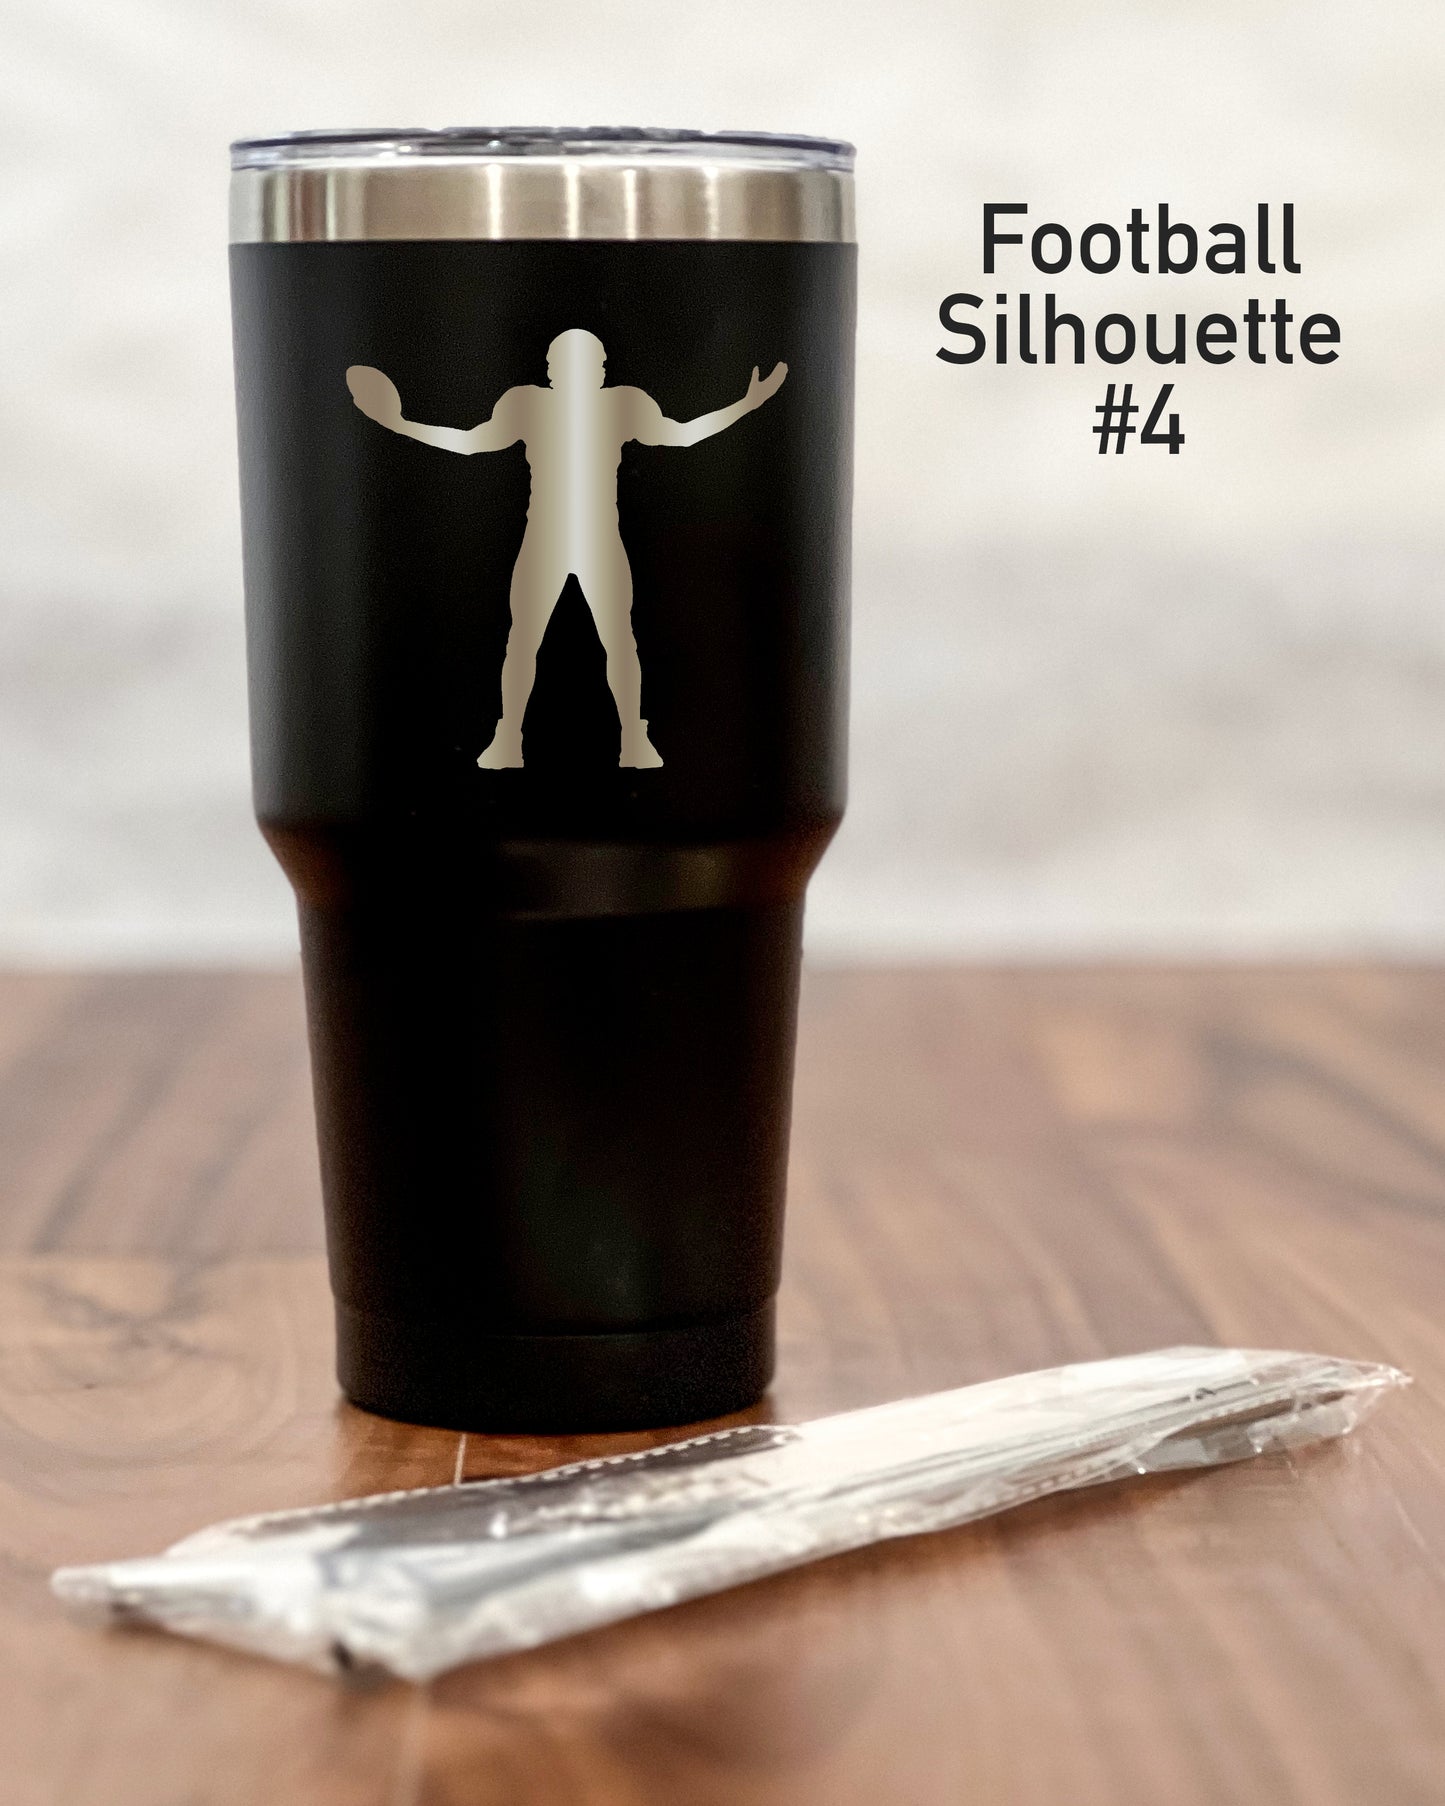 30 ounce Black Tumbler with football player silhouette